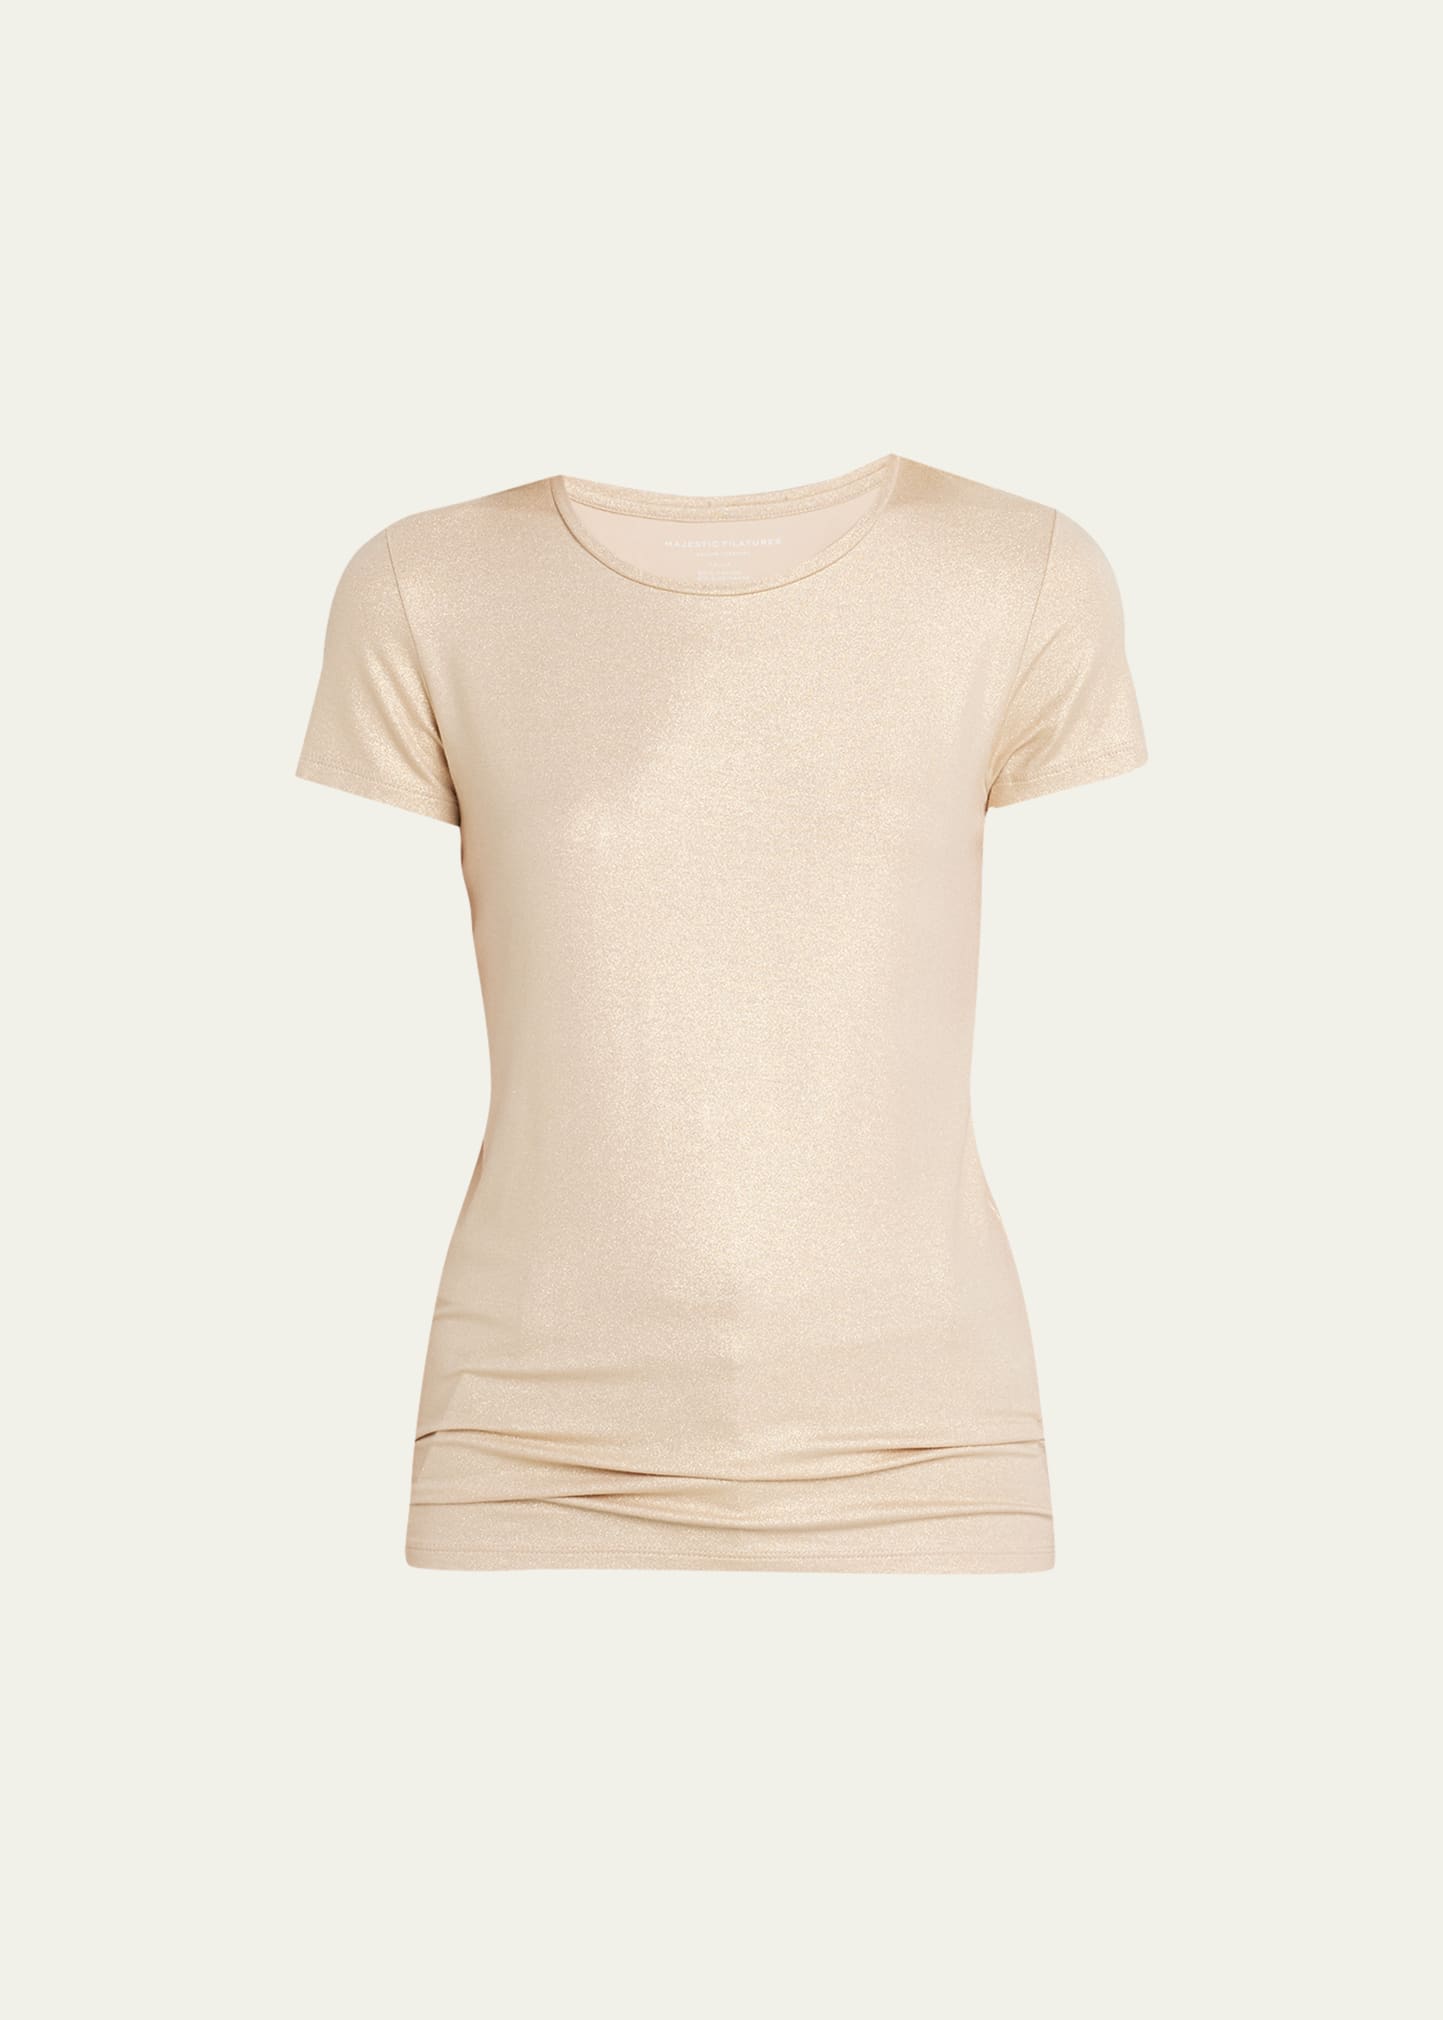 Majestic Soft Touch Metallic Crewneck Top In 742 Golden Sand